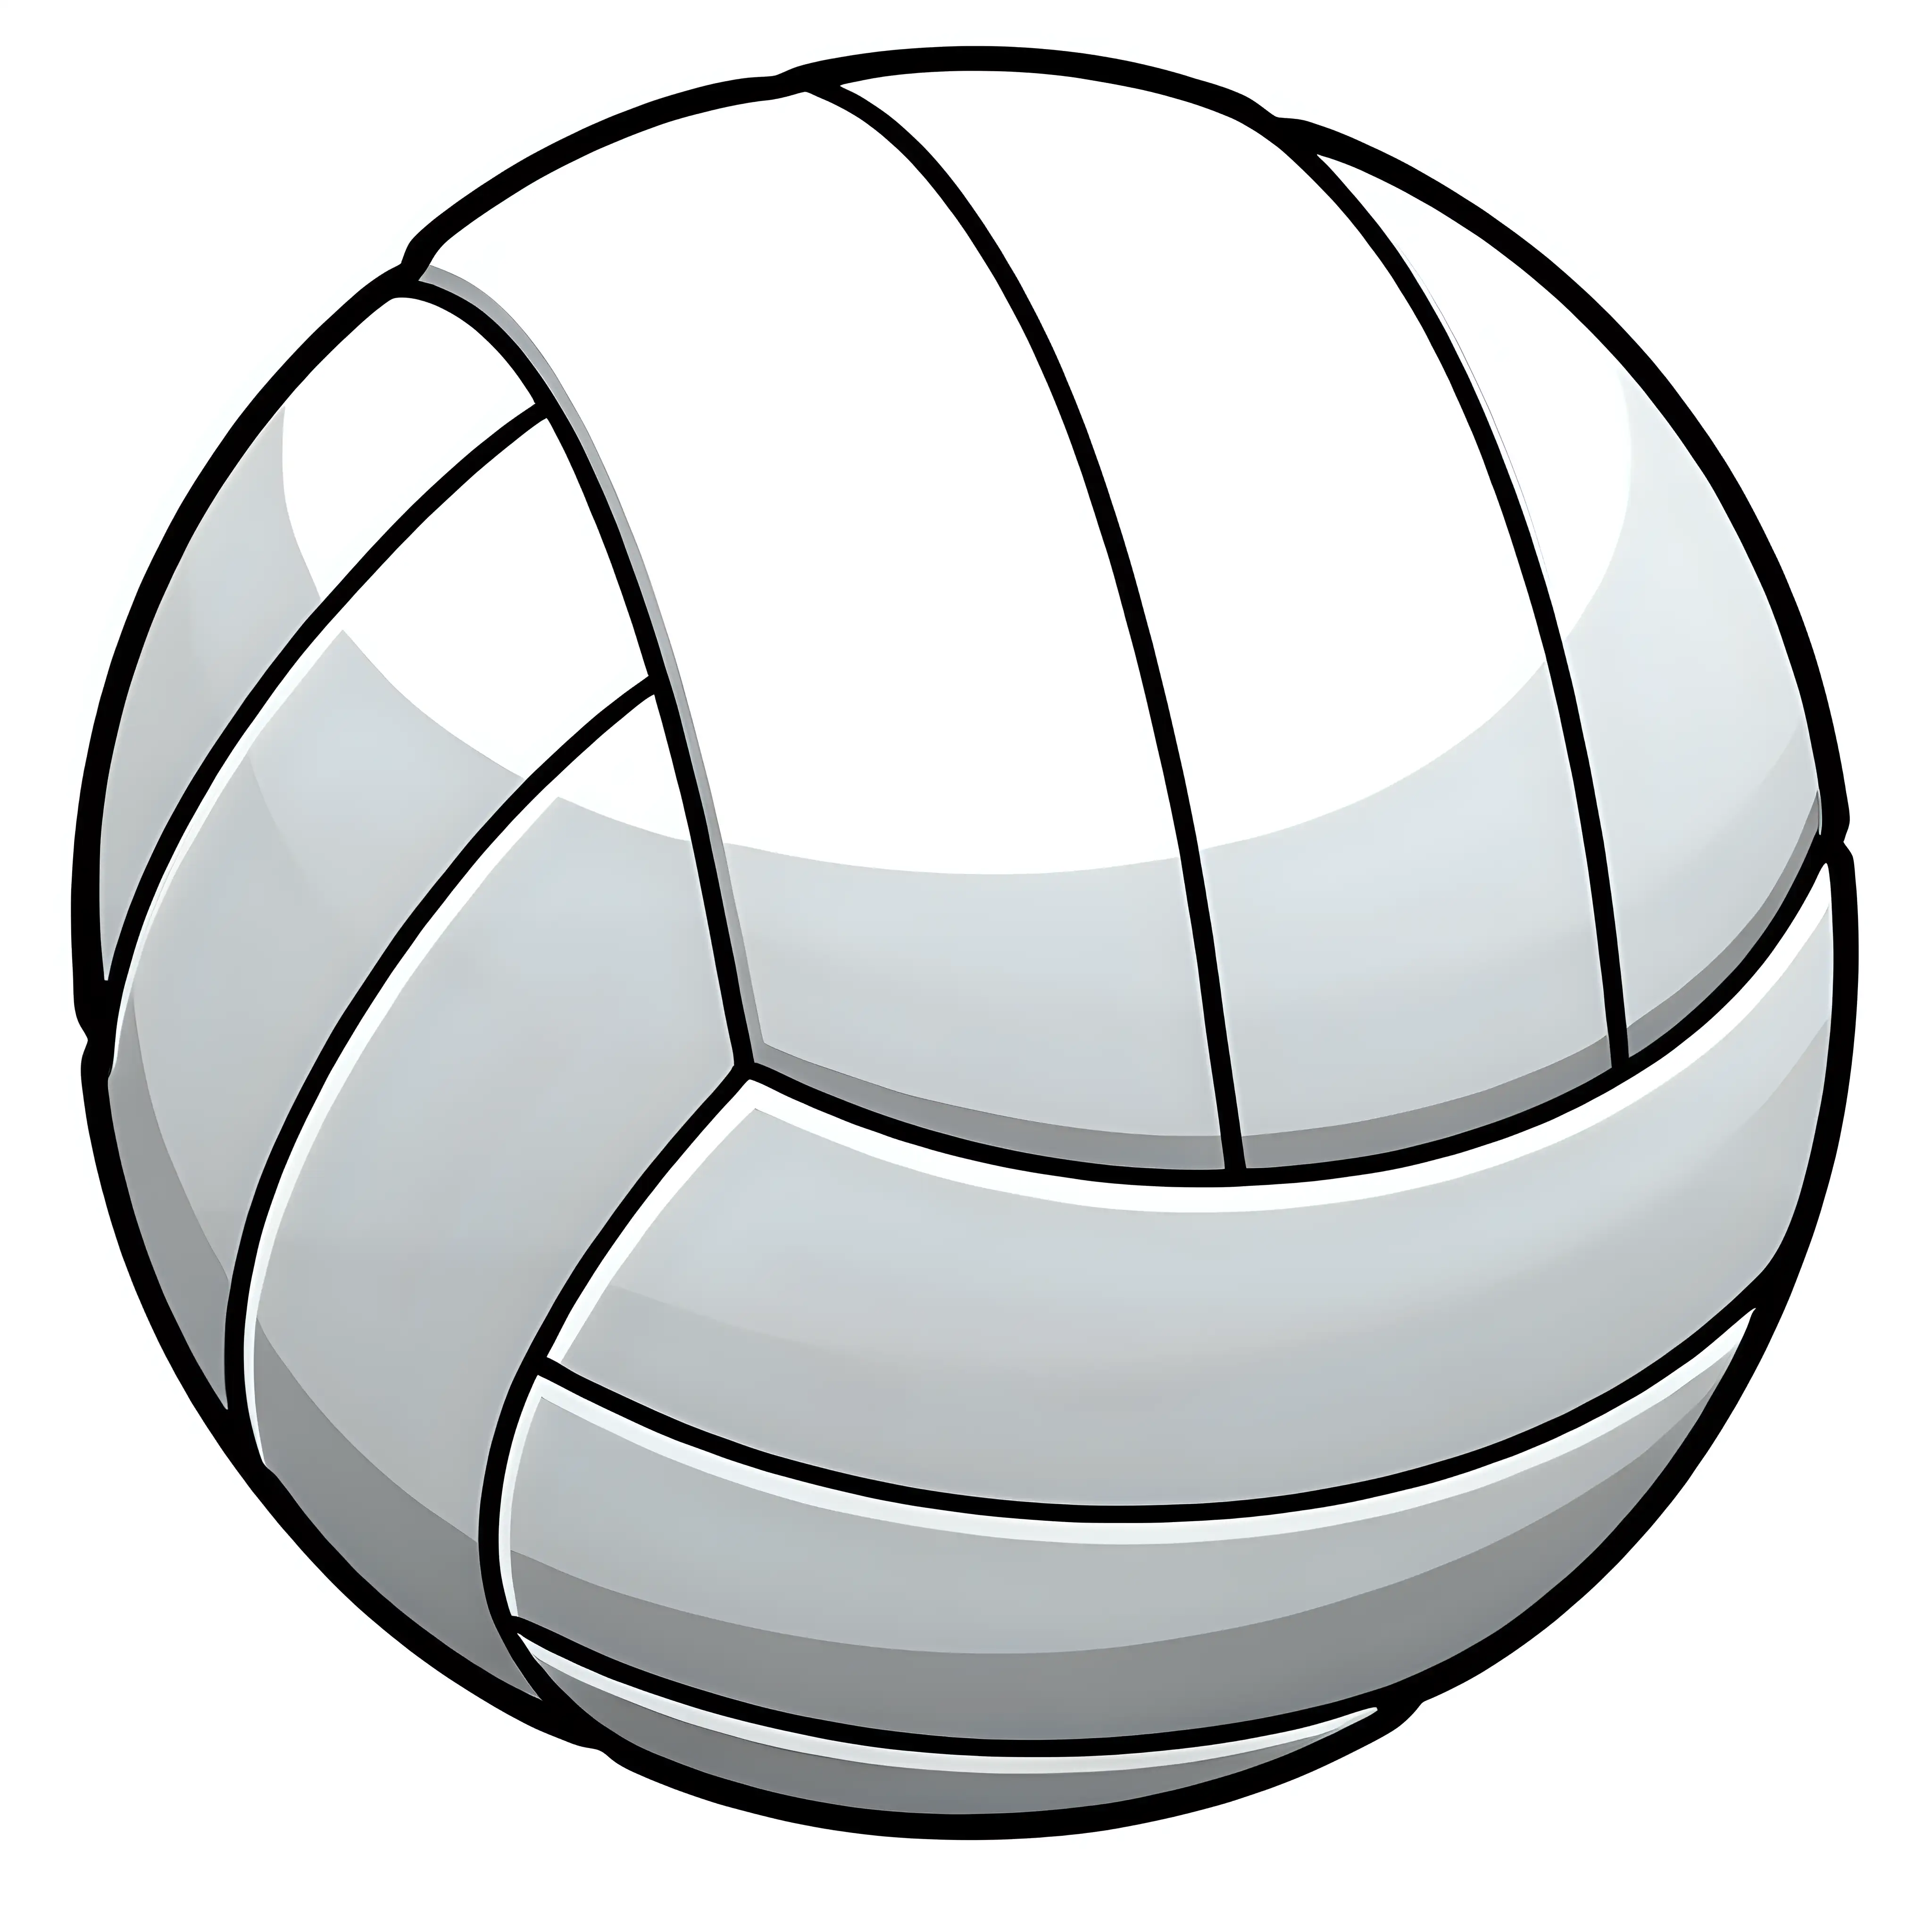 Simple White Volleyball Ball Sticker on White Background